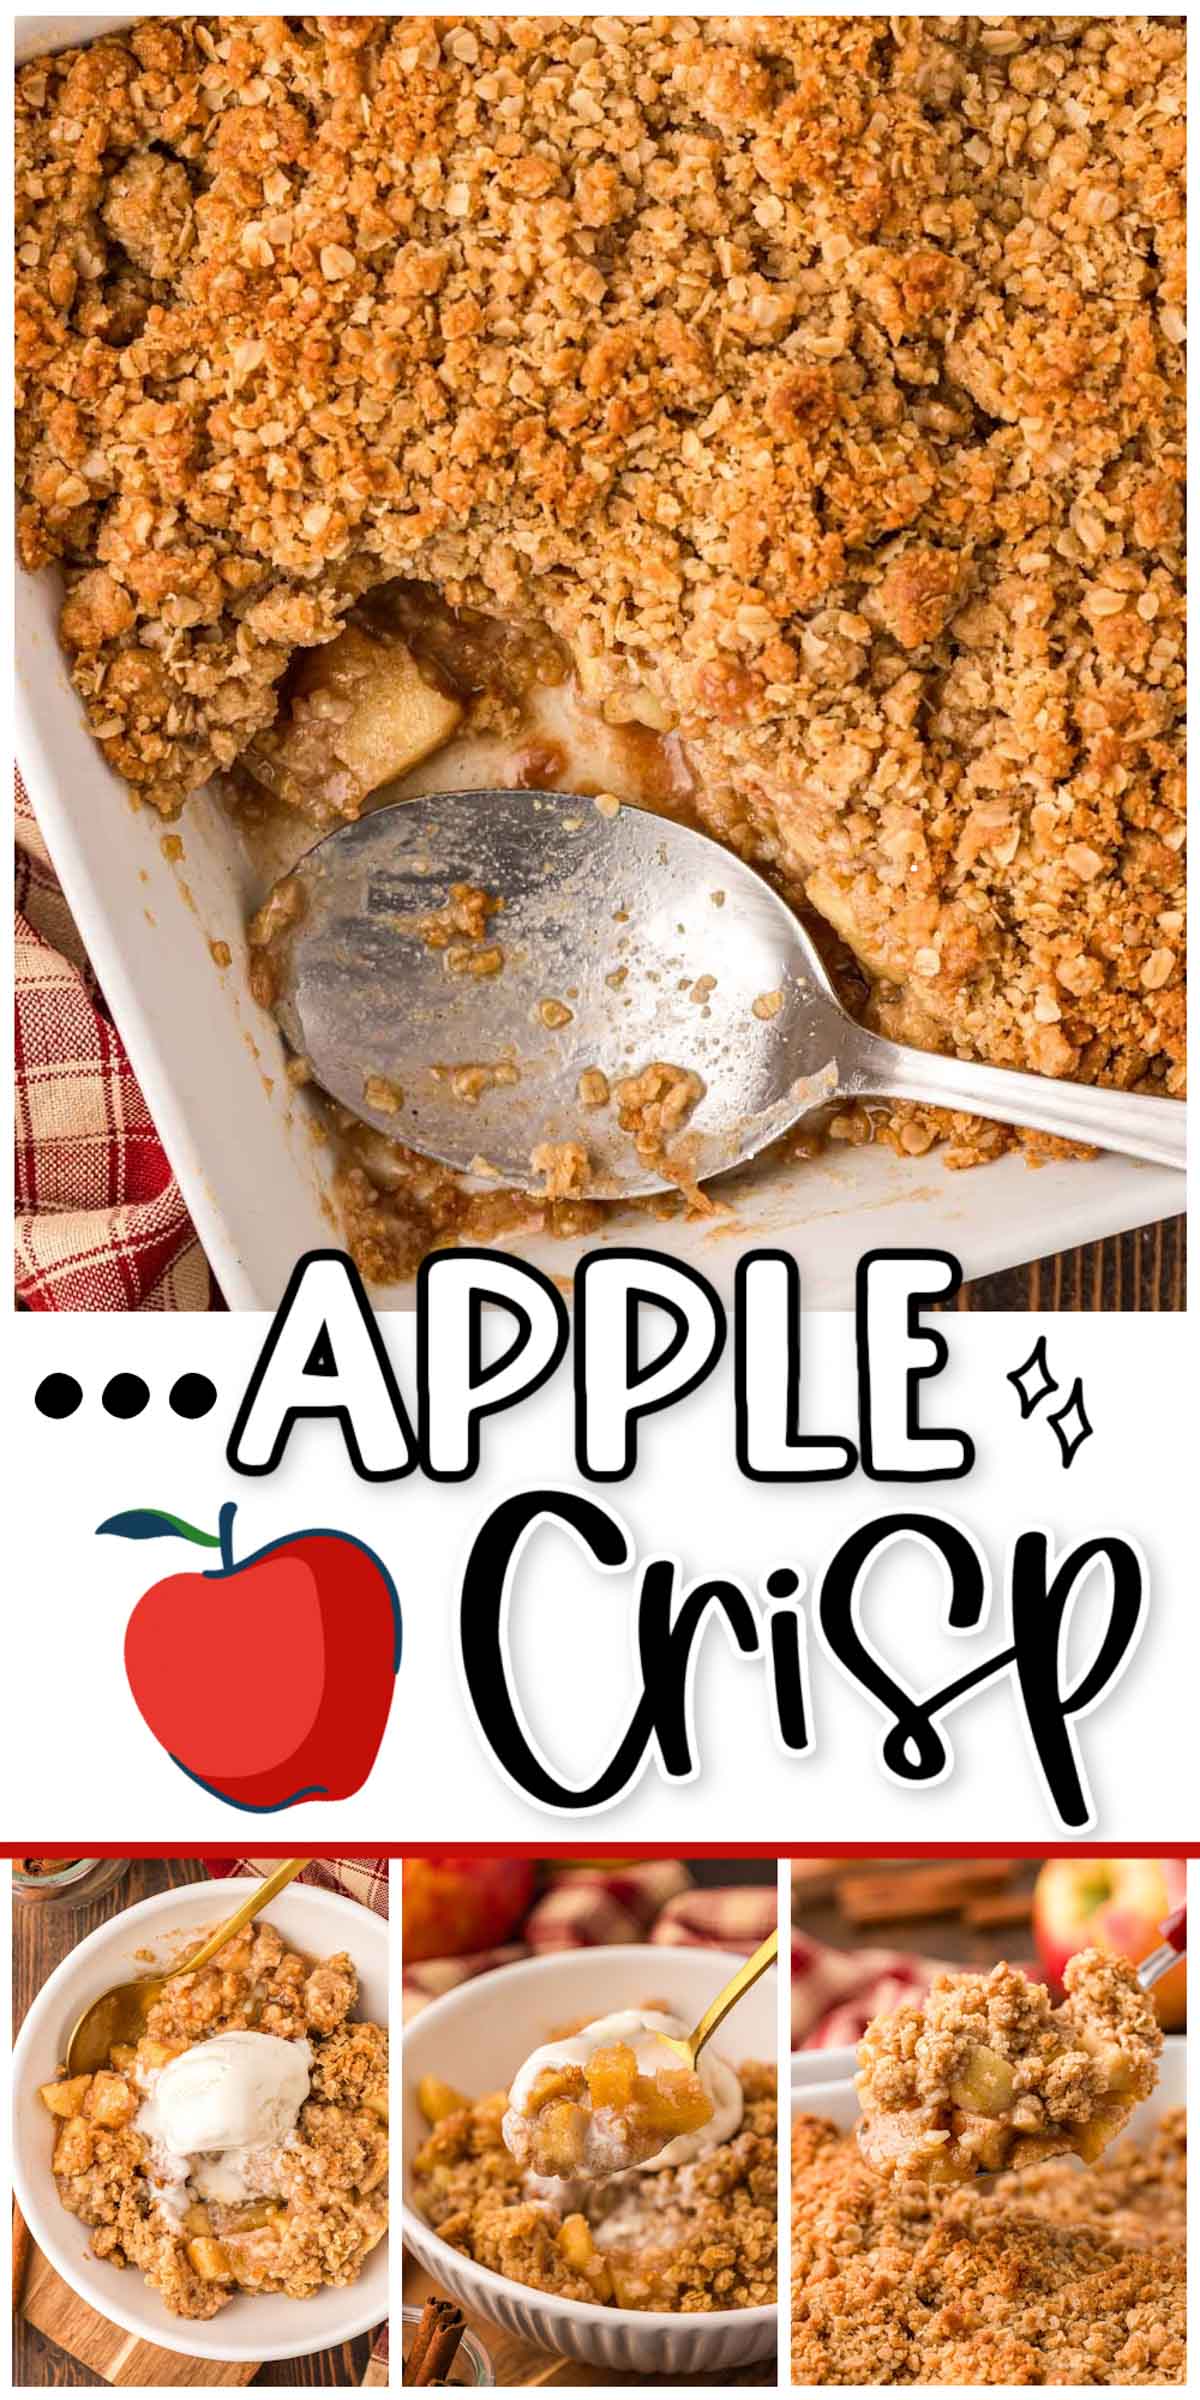 Apple Crisp is a classic dessert recipe that's perfect for summer and fall. Tender and spicy apples are topped with a sweet and hearty oat topping. via @sugarandsoulco